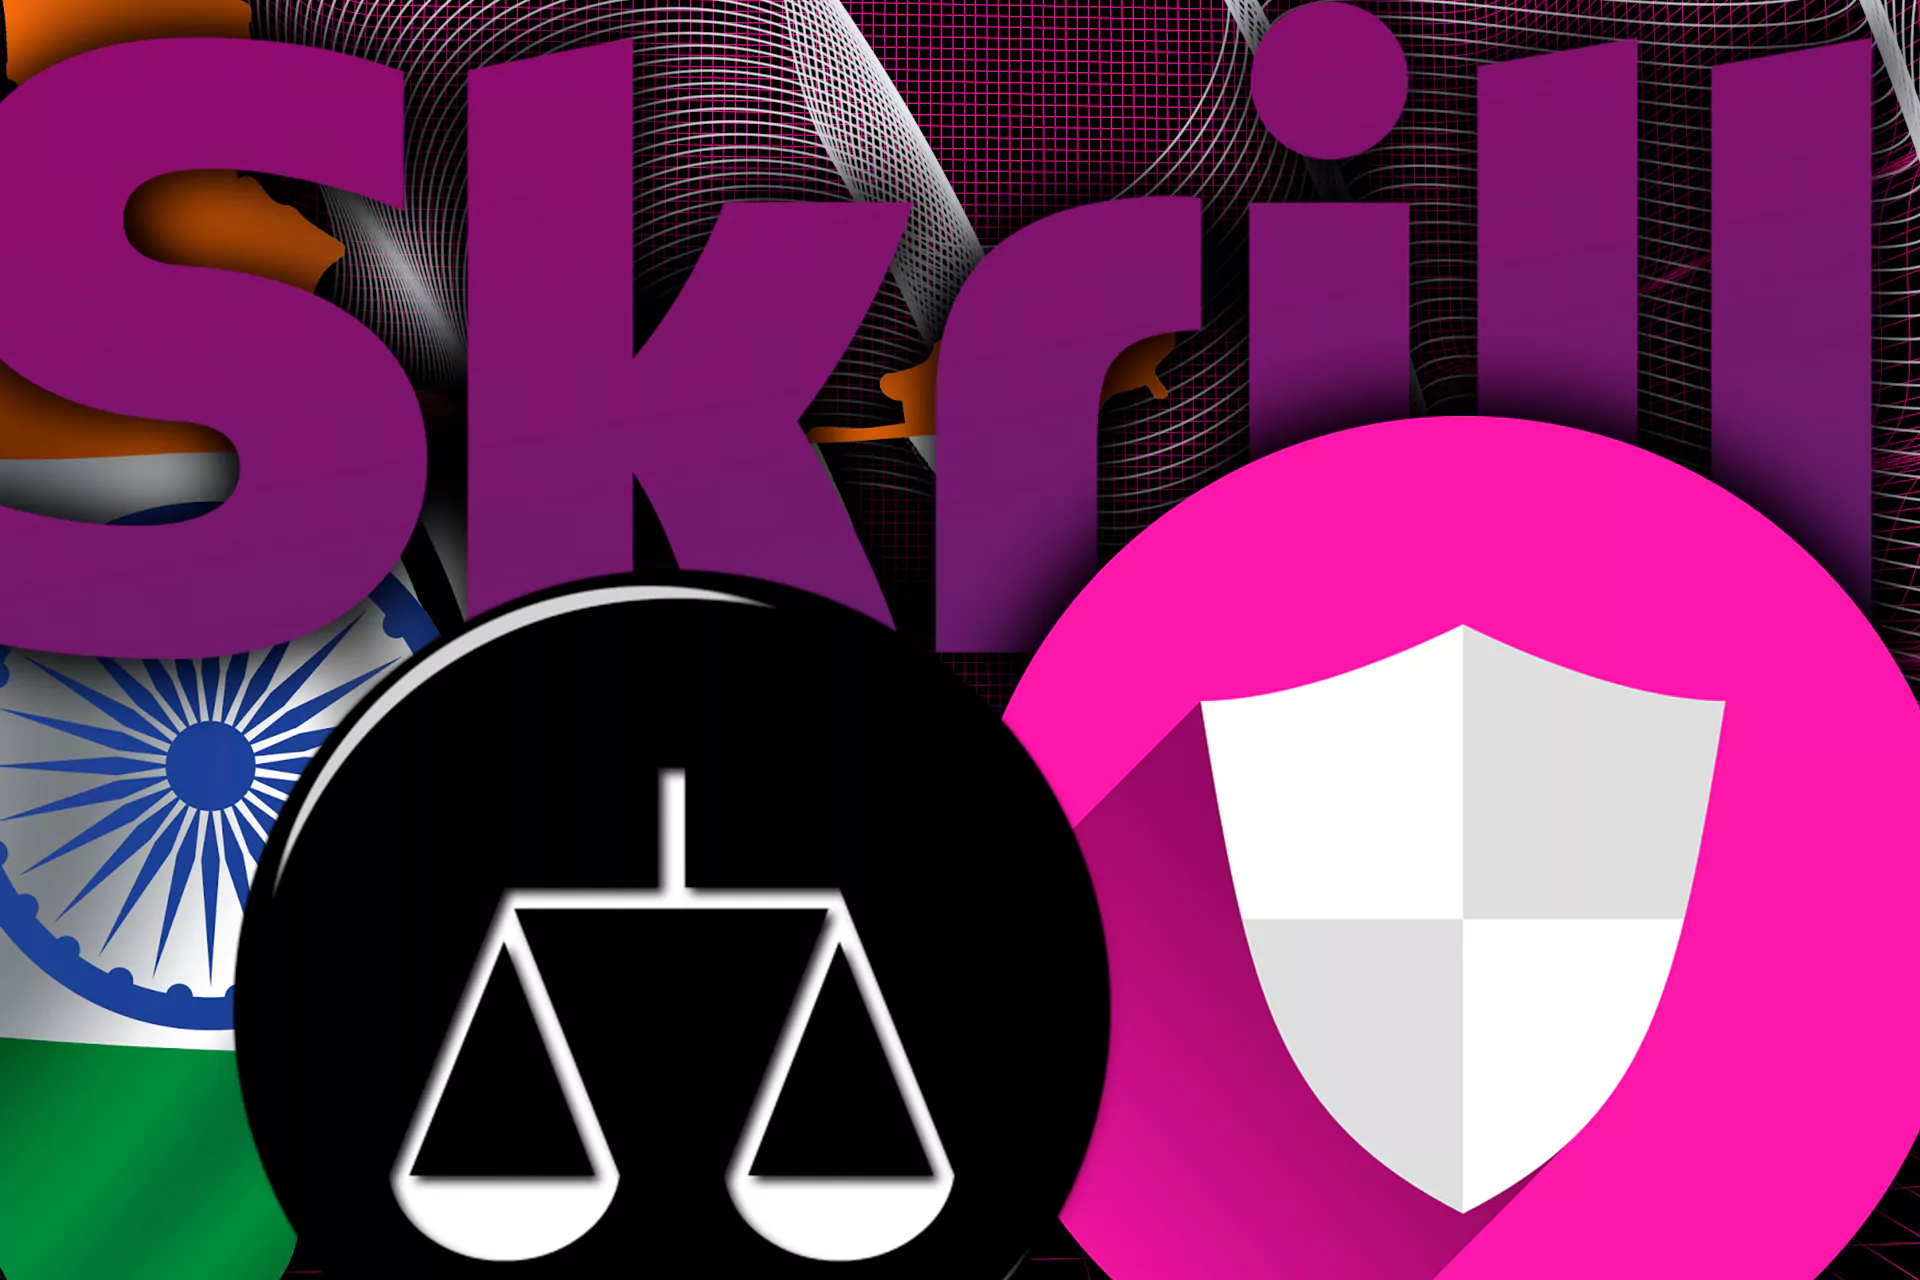 Skrill is absolutely legal and safe to use.